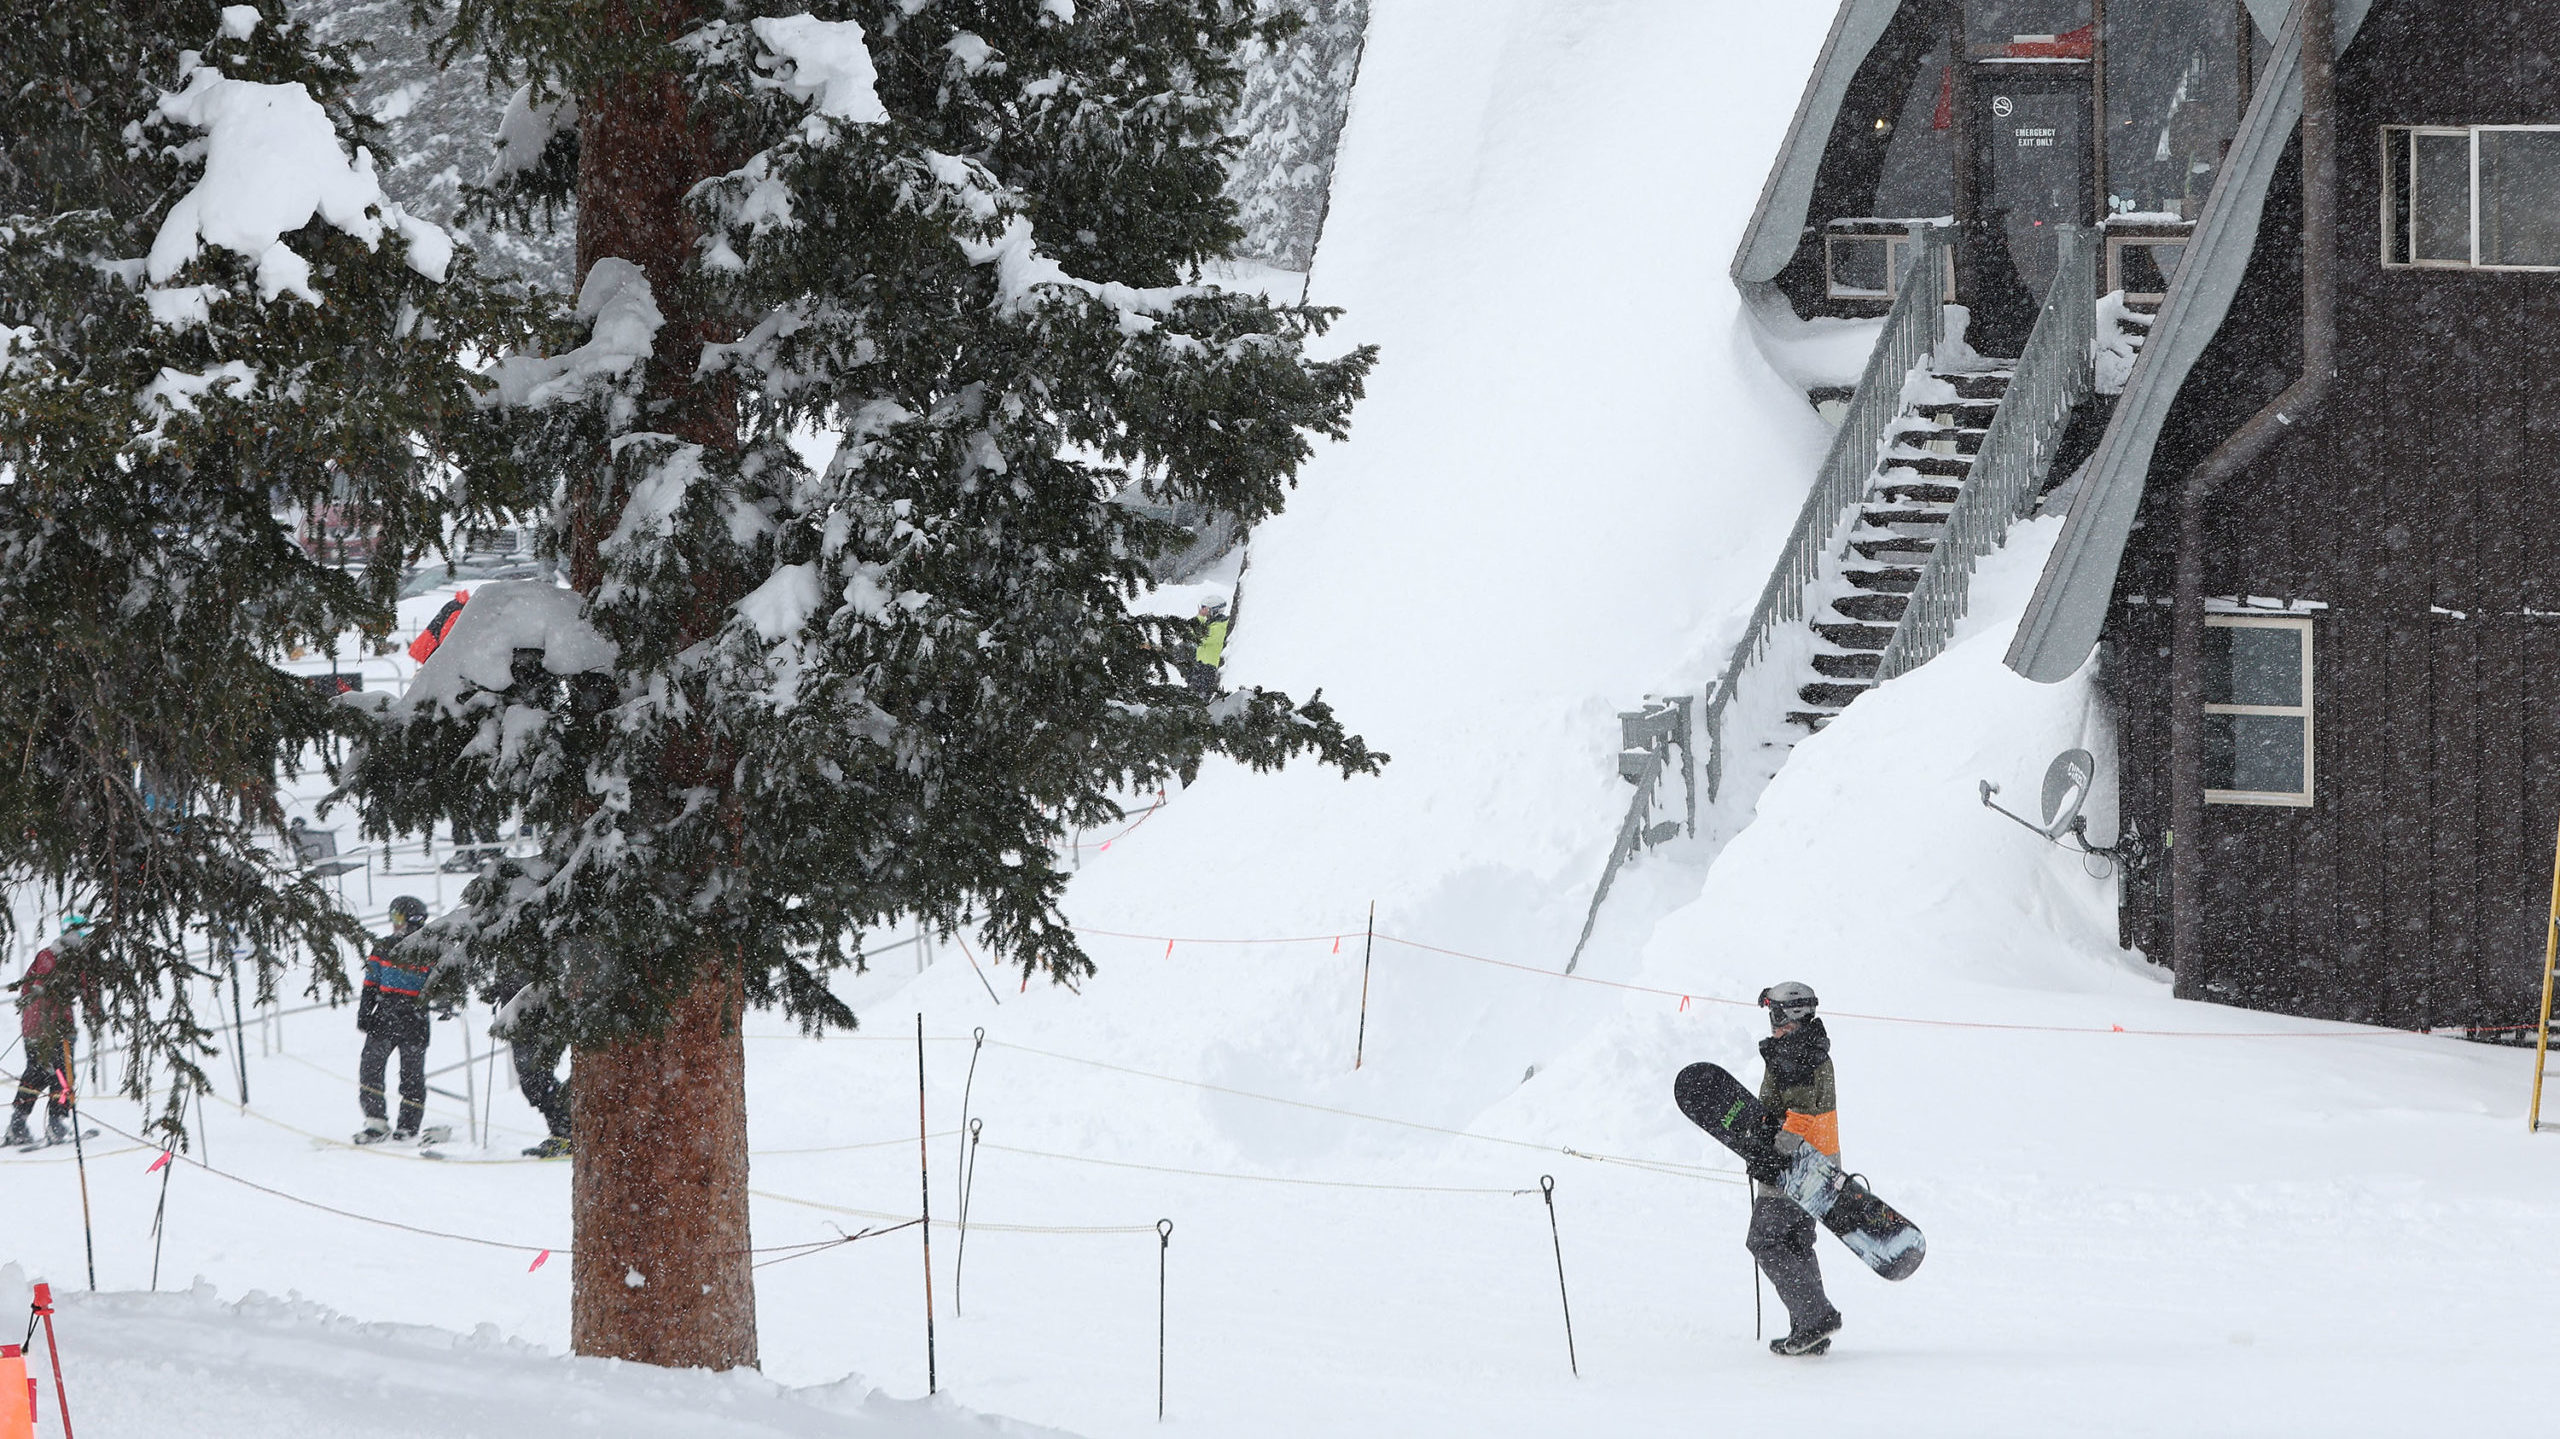 a snowboarder is pictured in a snowy area in utah ski resort...